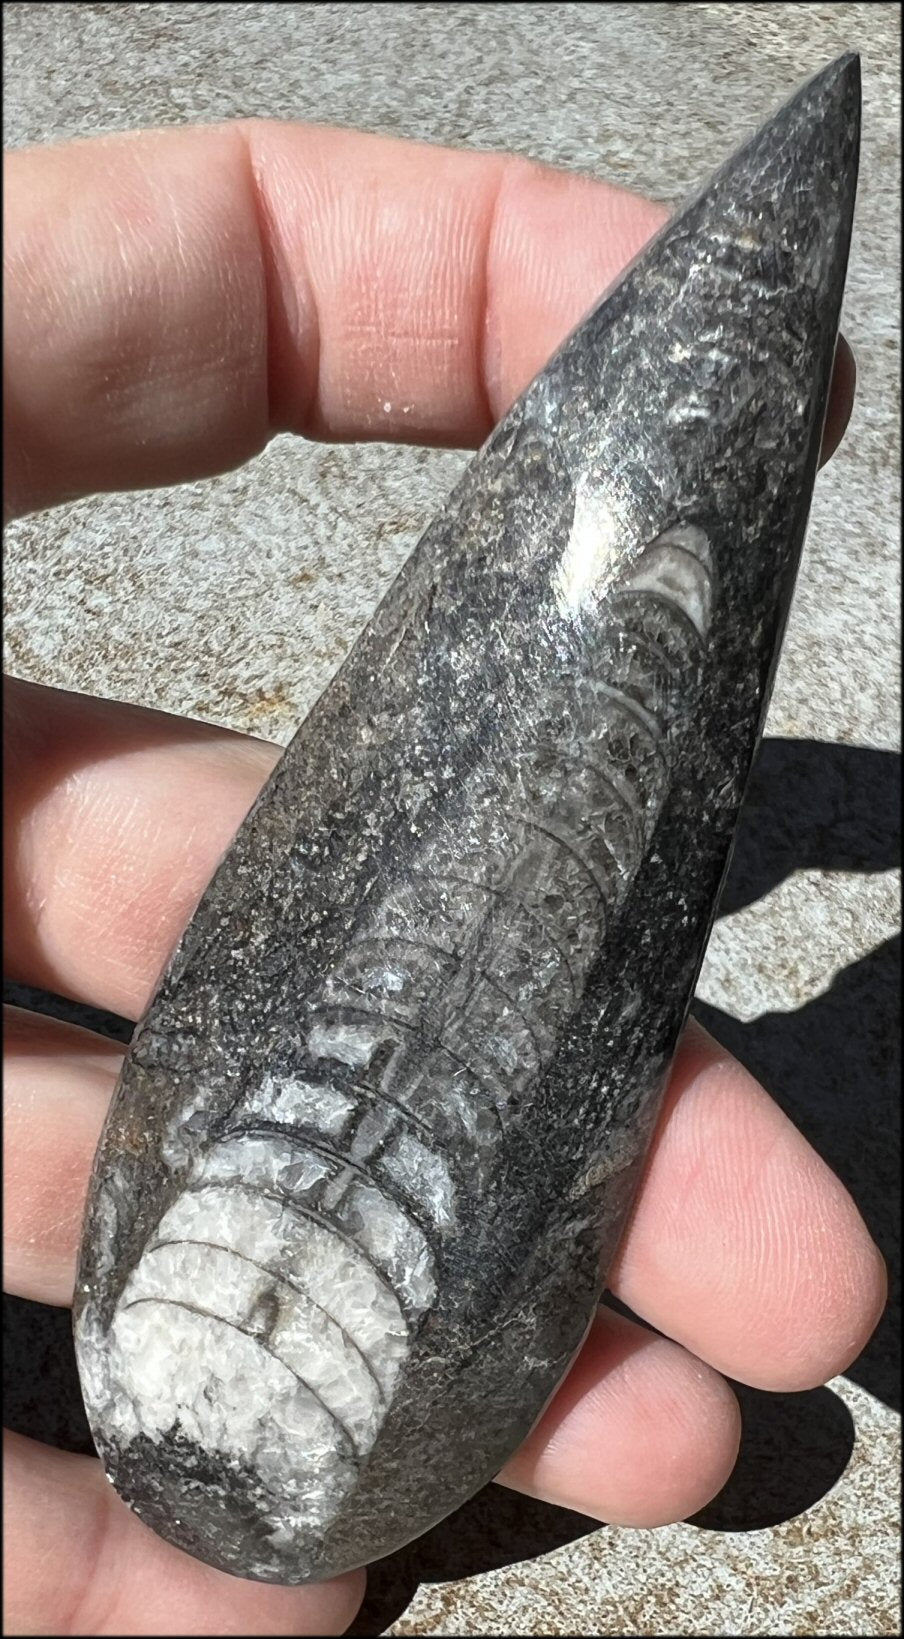 Polished Orthoceras Fossil from Morocco - Open to change, Let go of old programs